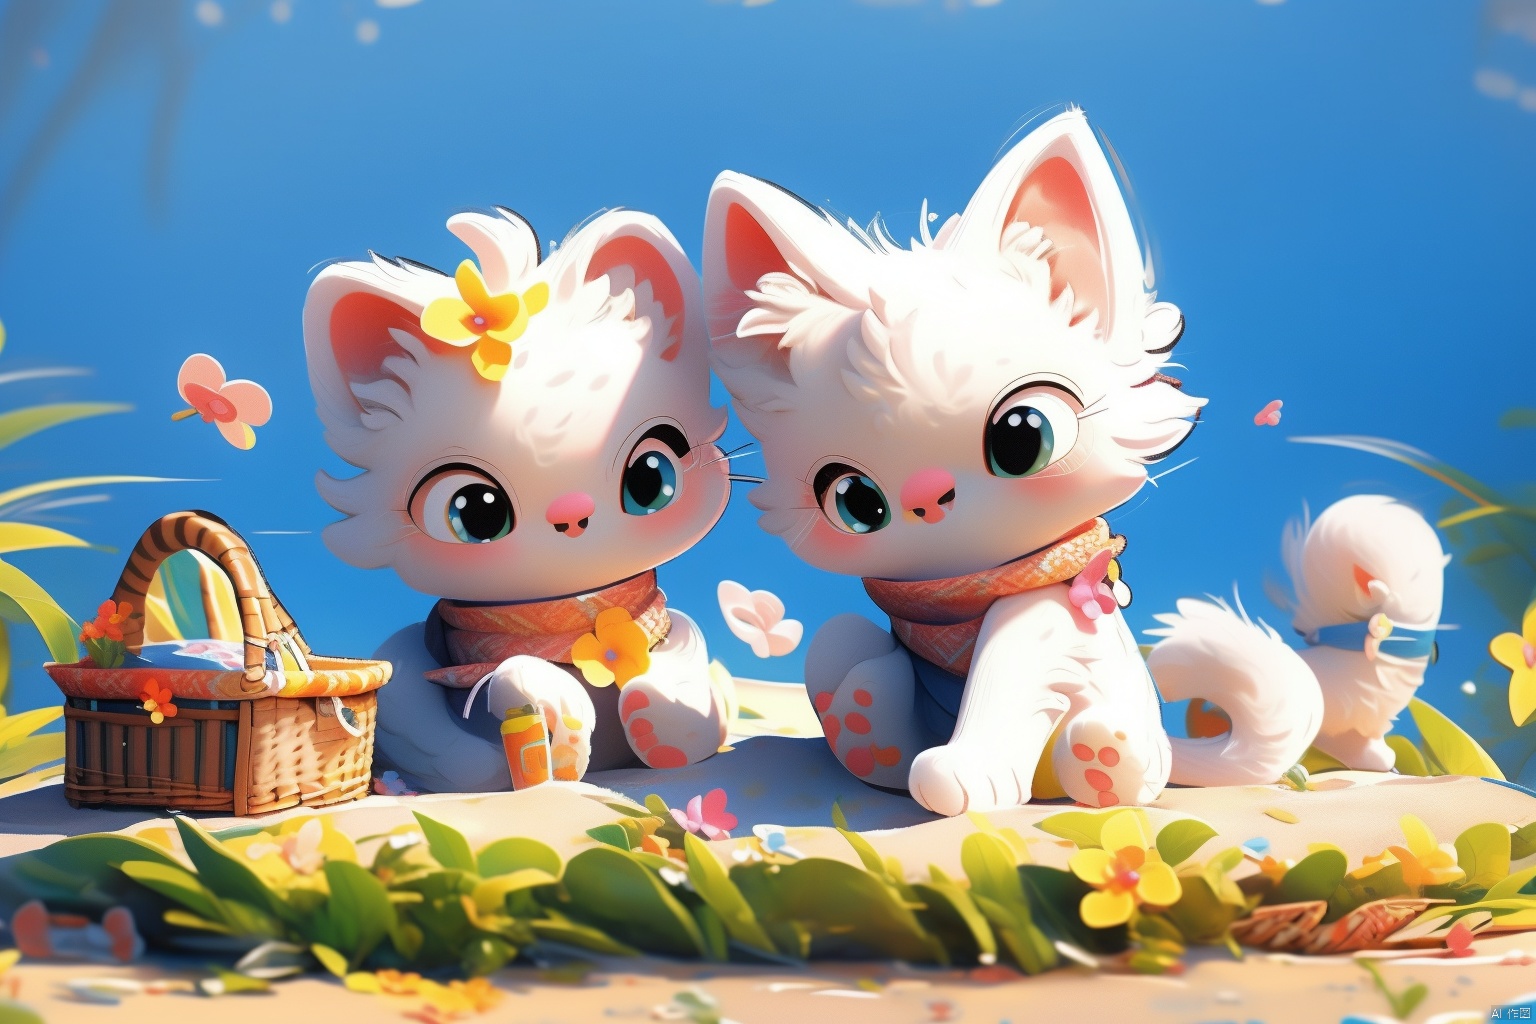  sunny,To play by the sea,
Bathing on the beach,
Camping, picnicking, feeling the wind.In Hainan, 
At this time mood at this time day, nothing little fairy., light master, （maomika：1.2）,(1cat:1.3),Lie on one's stomach, maomika, cat, Hanamawine,  three views,cure, chibi, MG xiongmao, Dog_Teddy